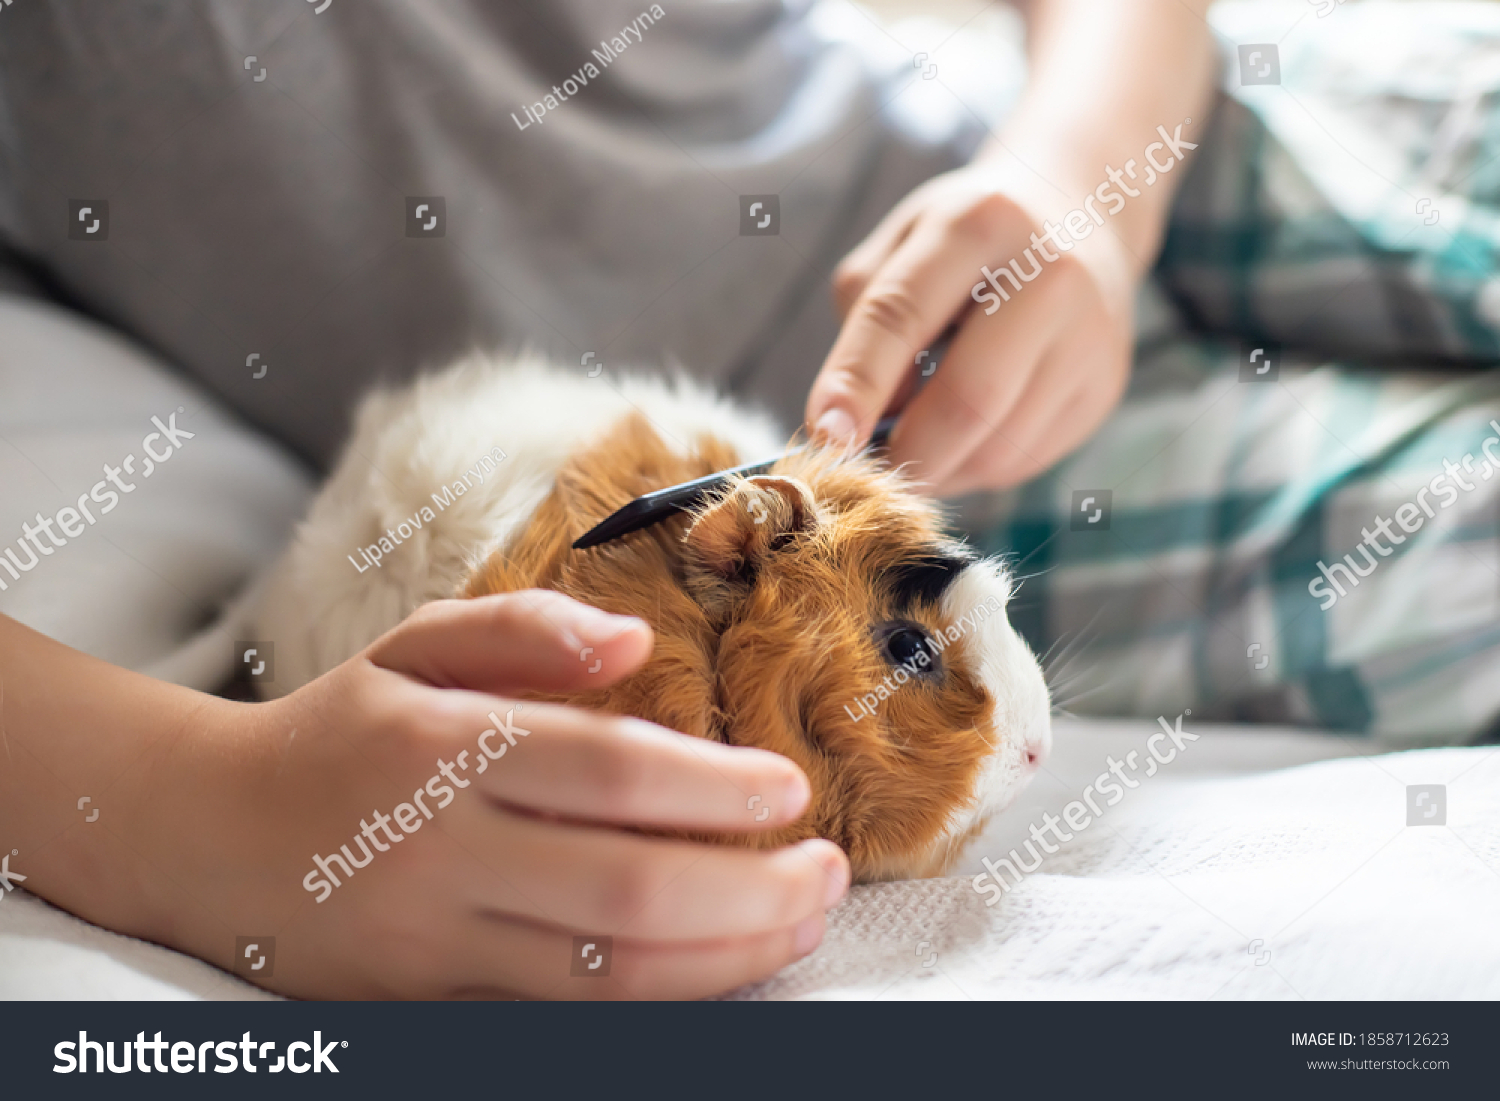 boy combs a guinea pig. Wool care pets. Long-necked rodent #1858712623